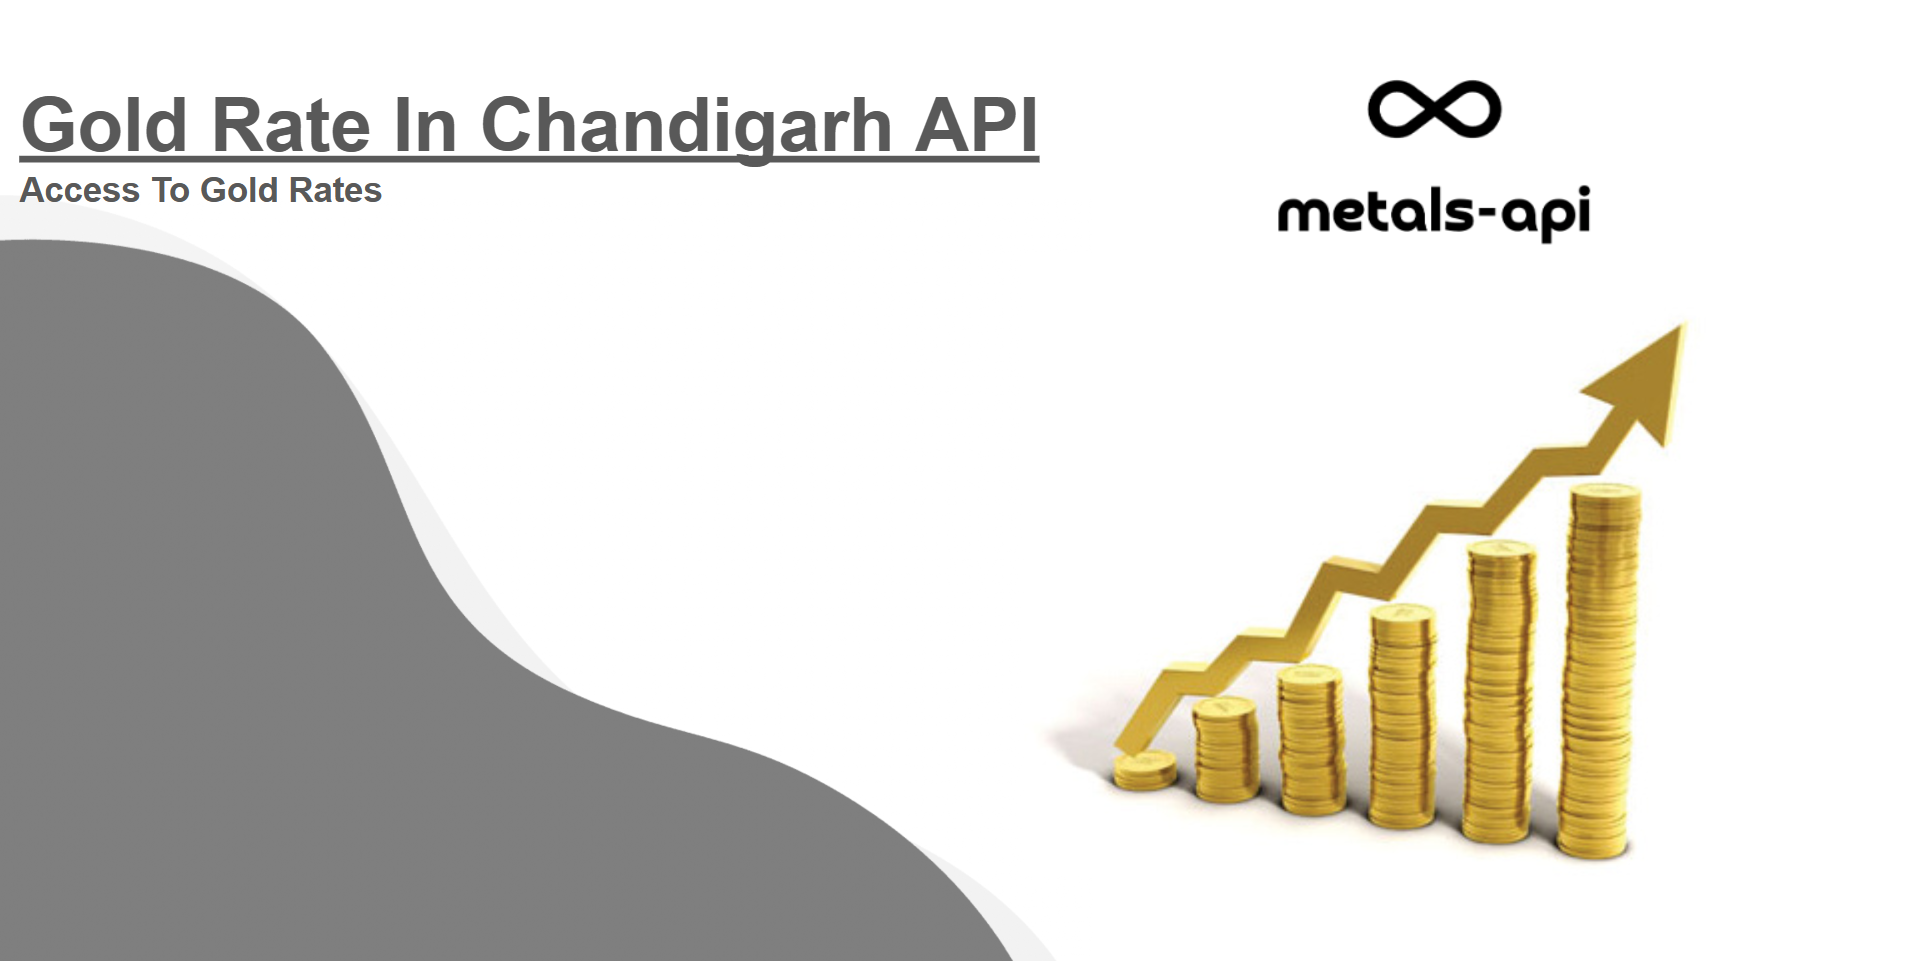 Access To Gold Rates In Chandigarh With This API